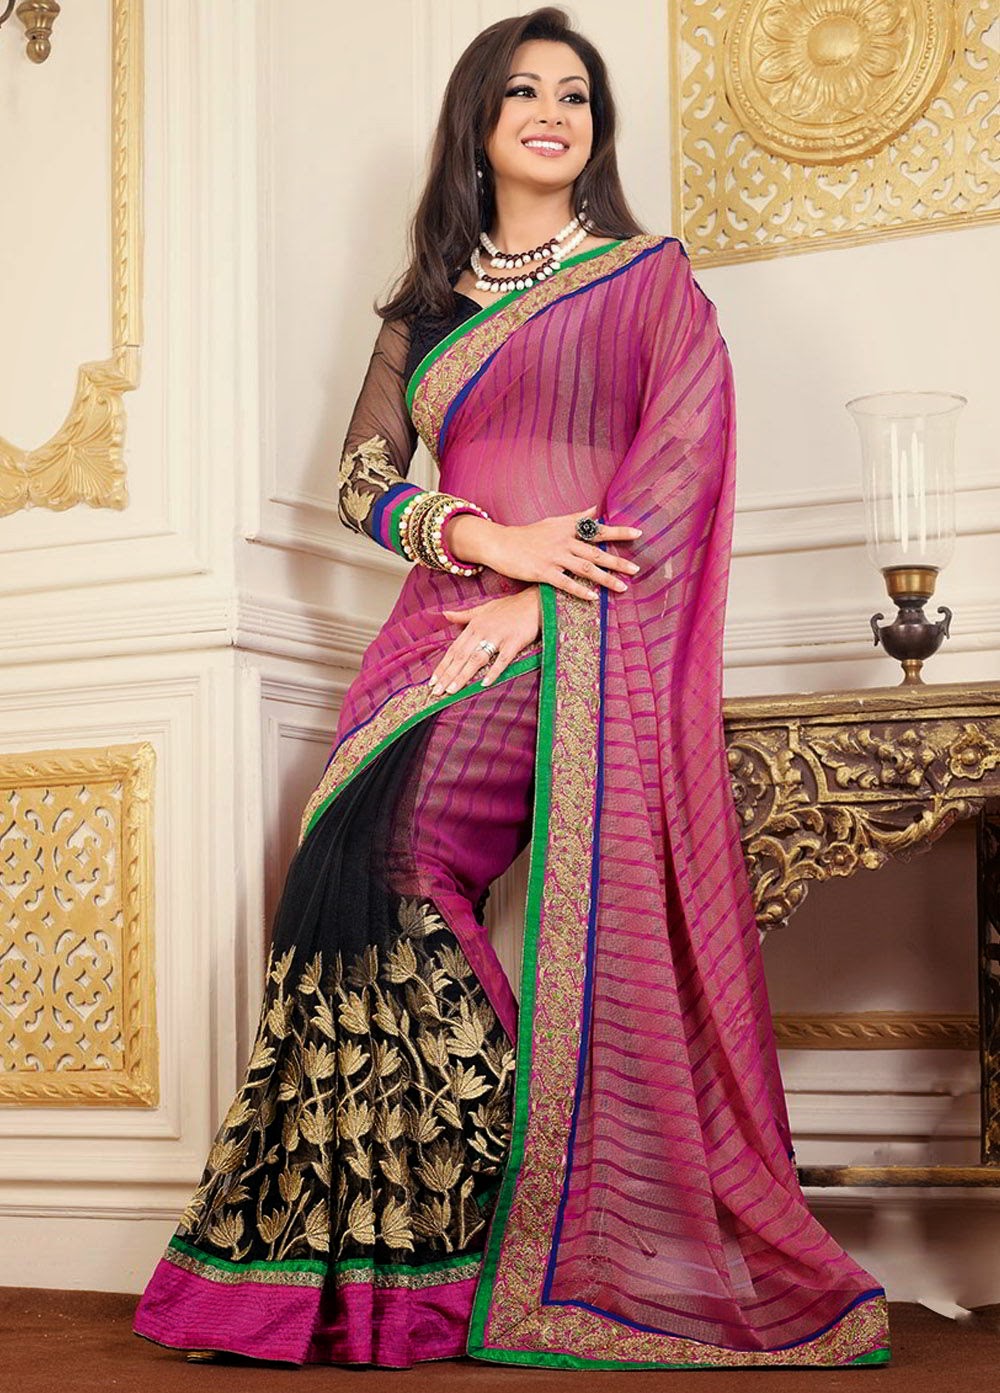 Beautiful Sarees Collection For Actress Preeti Jhangiani Wallpapers Free Download 